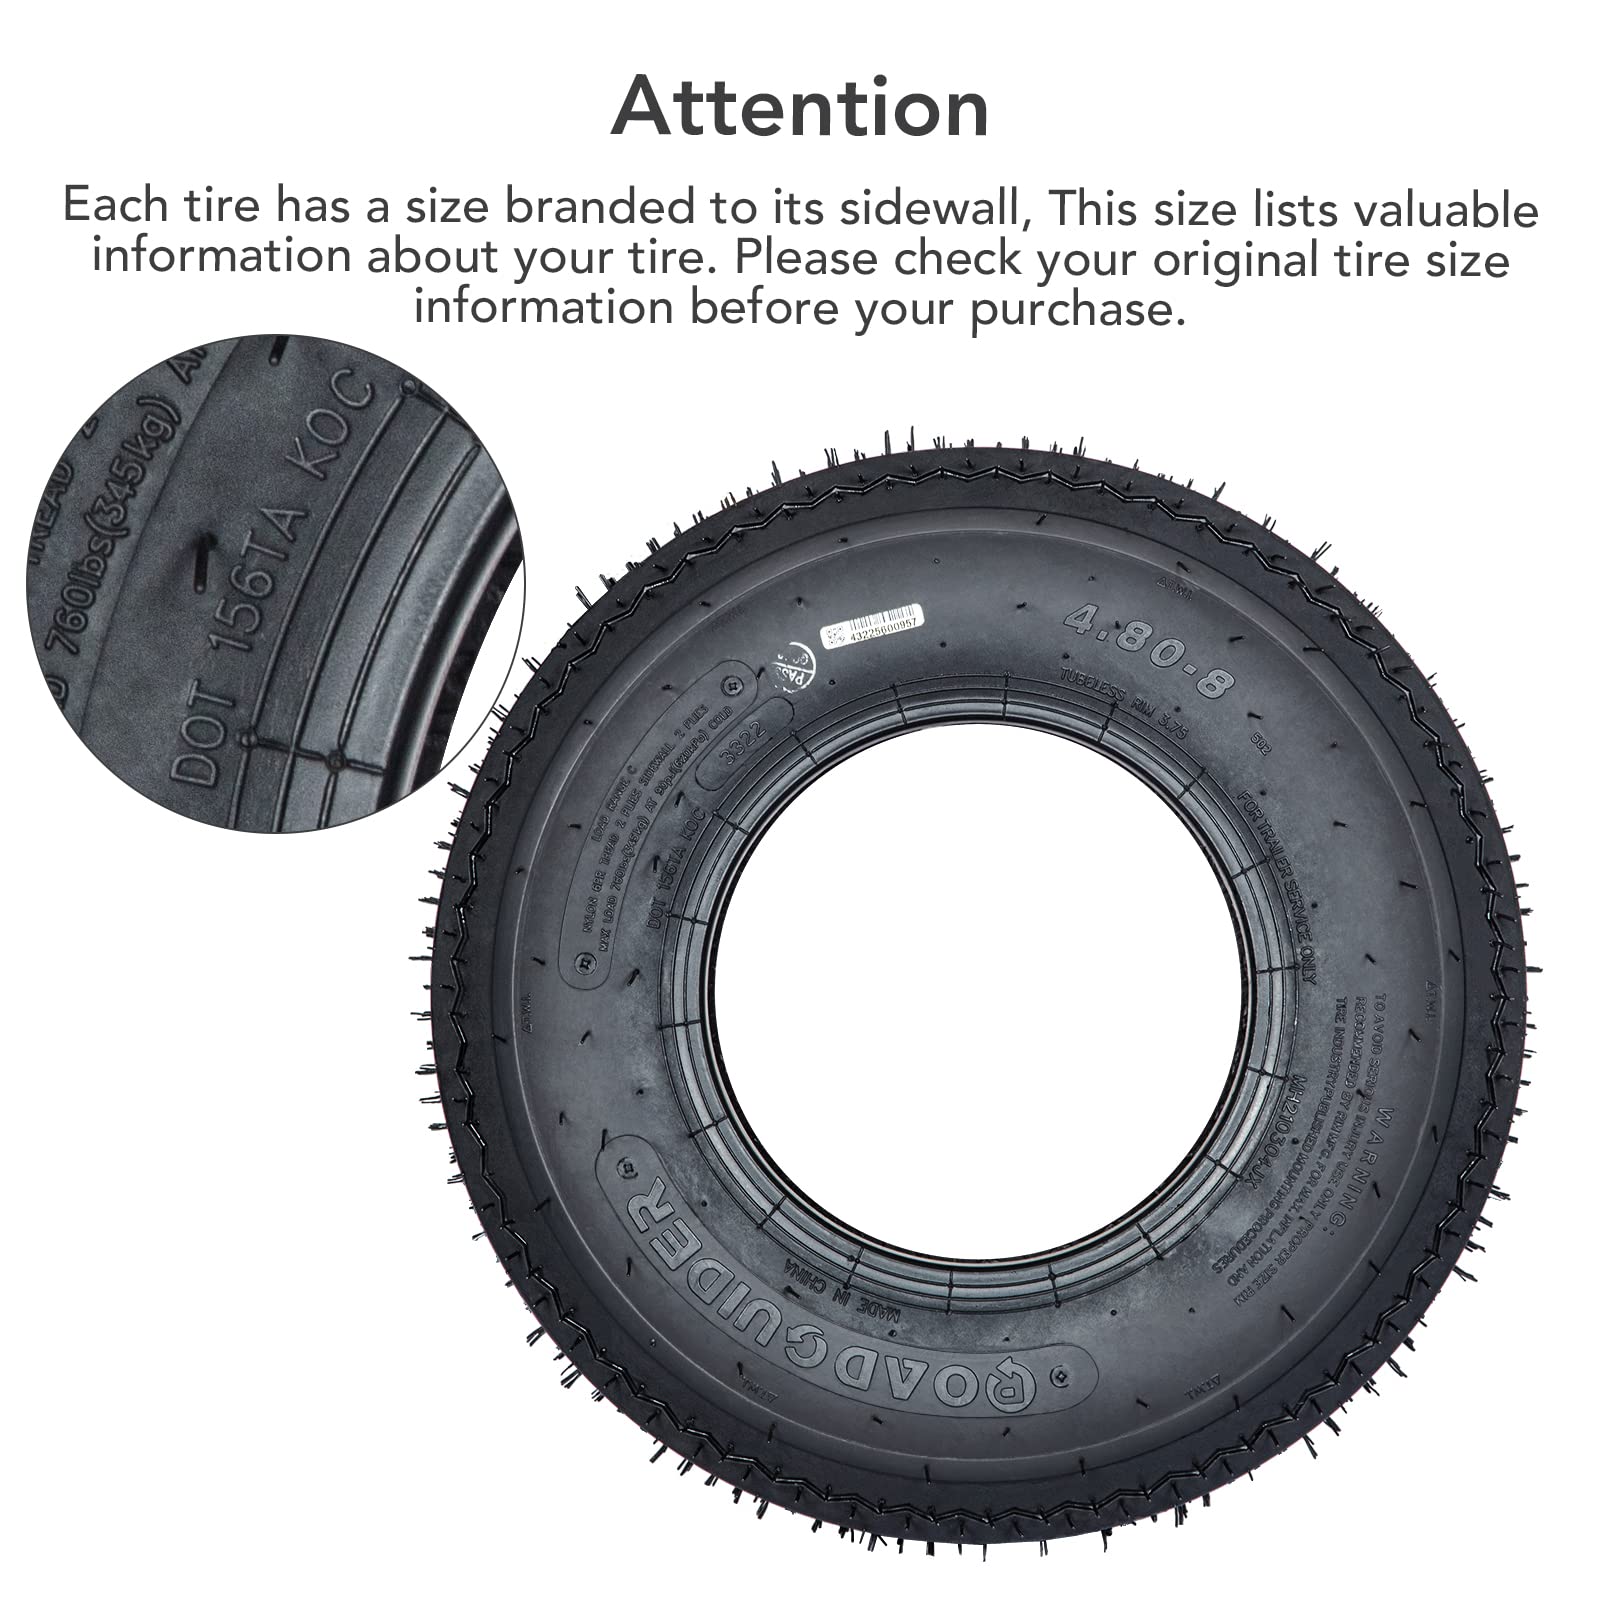 2-Pk Trailer Tires, 2-Pack Trailer Radial Tires, 4.80-12 6PR, Load Range C, 6 Ply Spoke Wheel,Suitable for All Kinds of Small and Light Trailers, 4.80-12 6PR